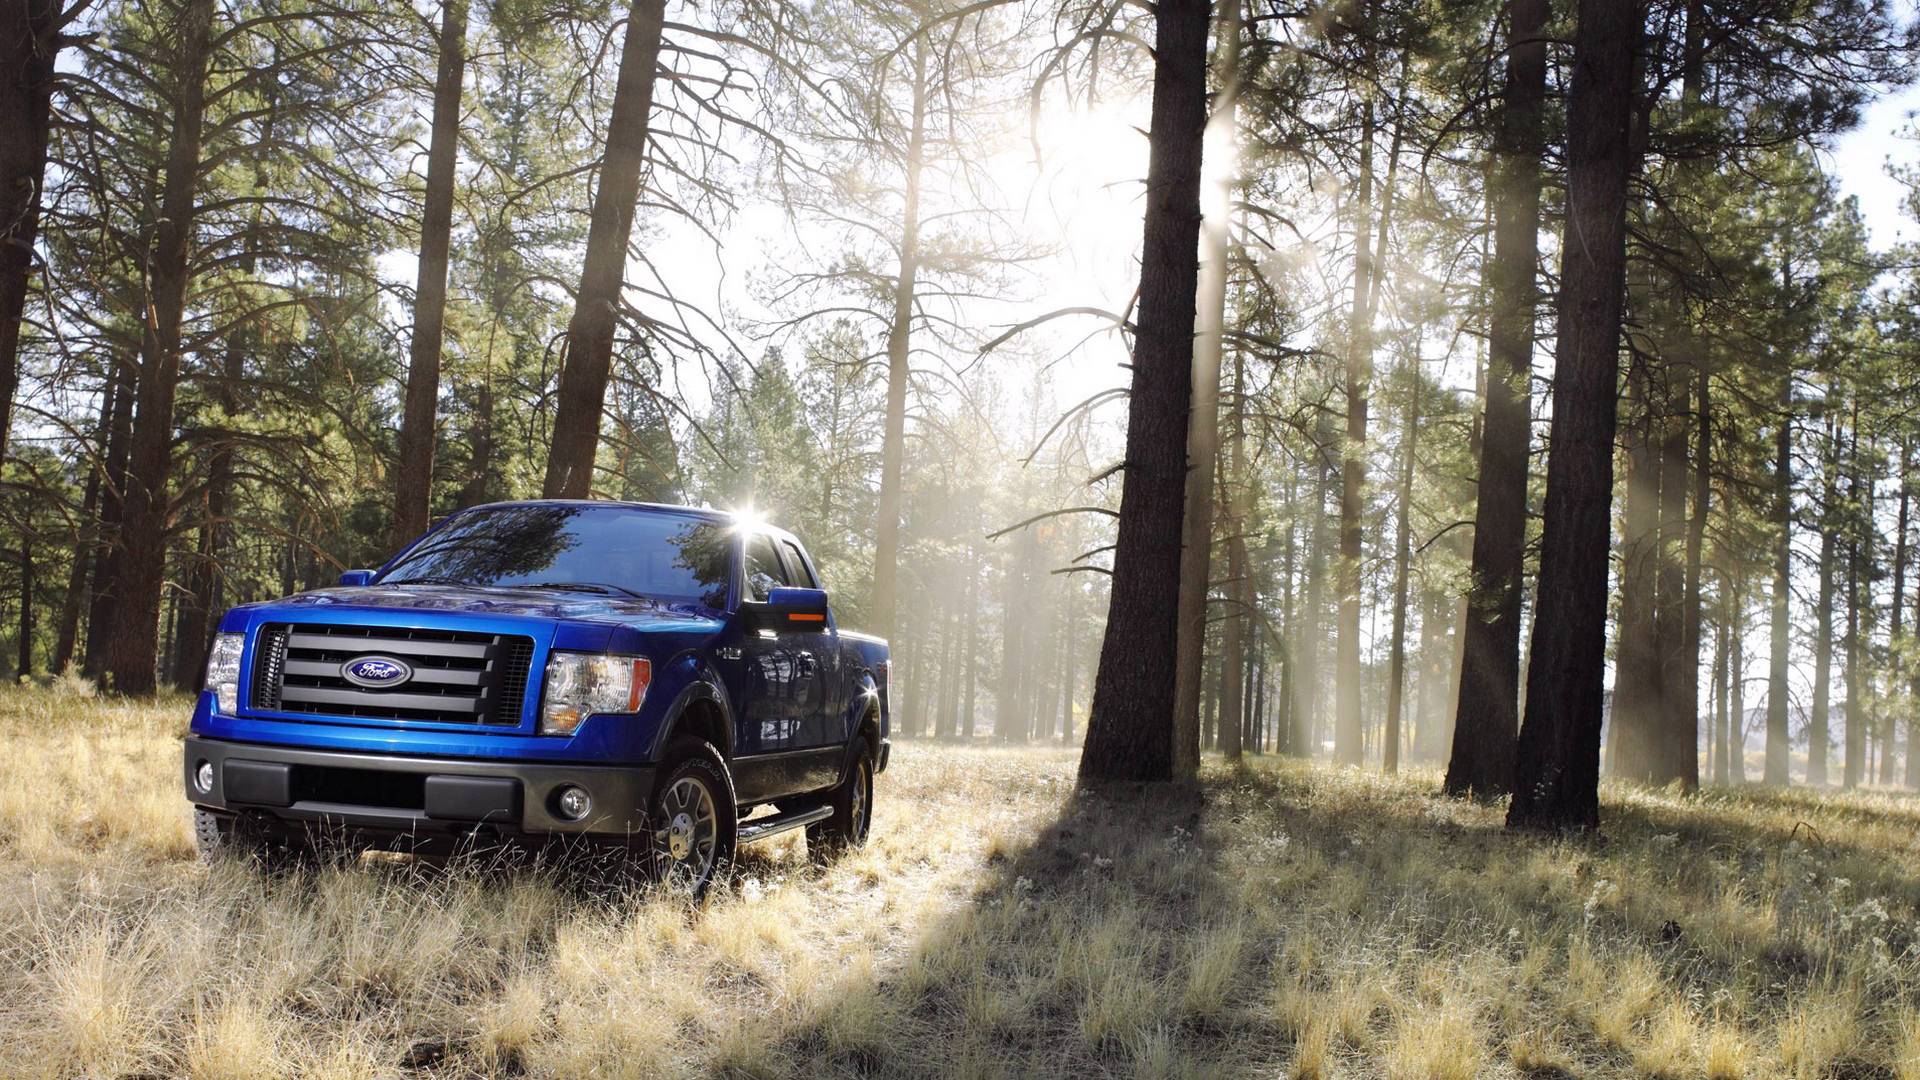 Ford Truck Wallpaper Picture, Cars Wallpaper